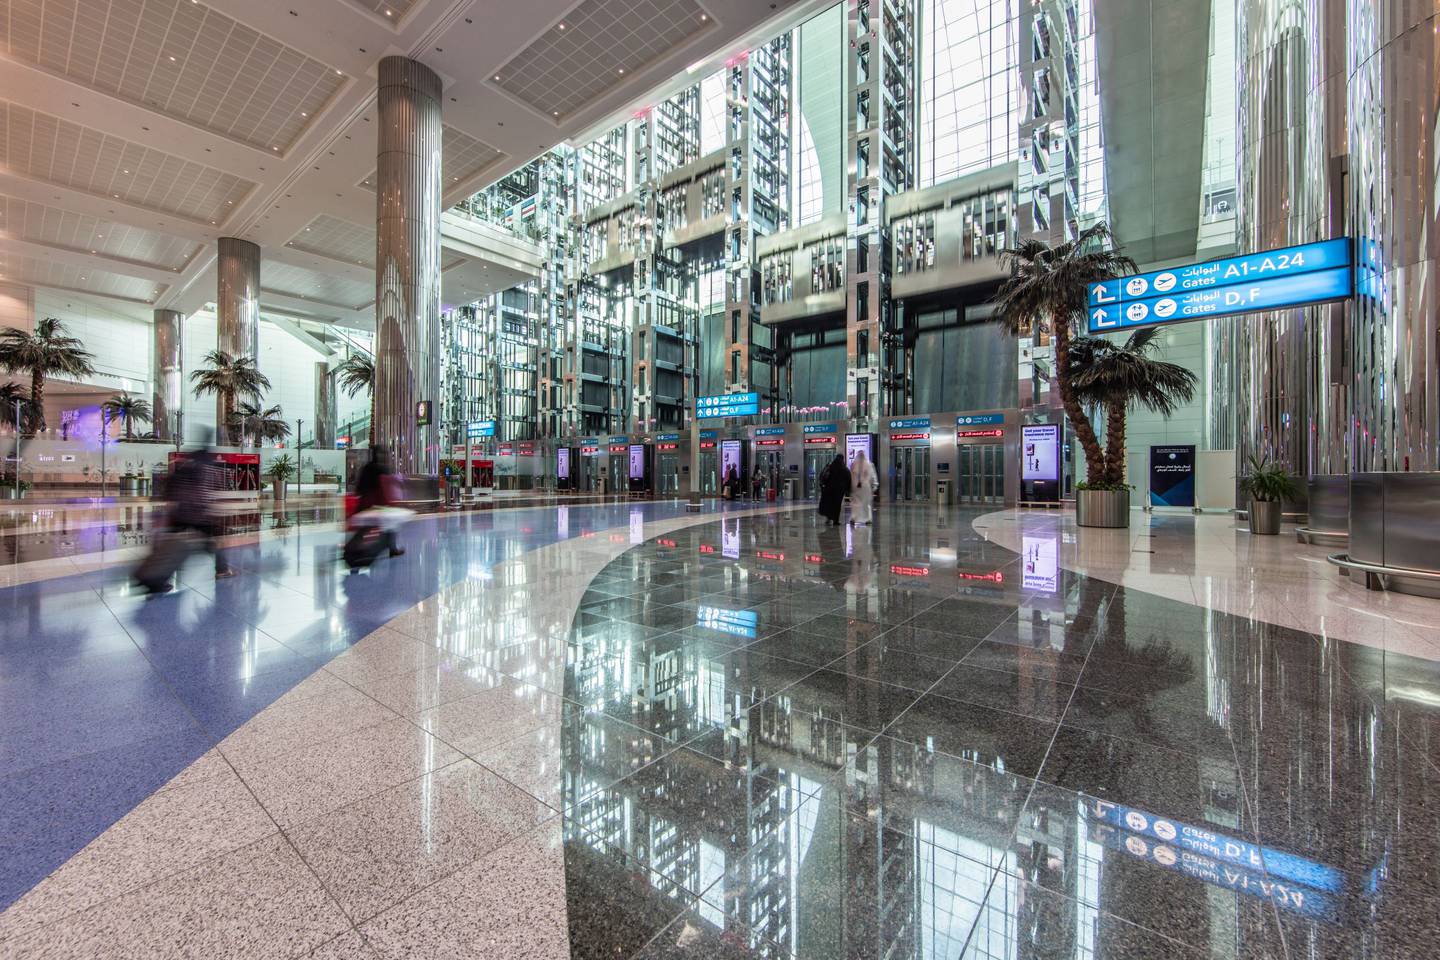 Transit passengers can fly to the UAE from 12 destinations in Africa from where travel was previously banned. Photo: Dubai Airports